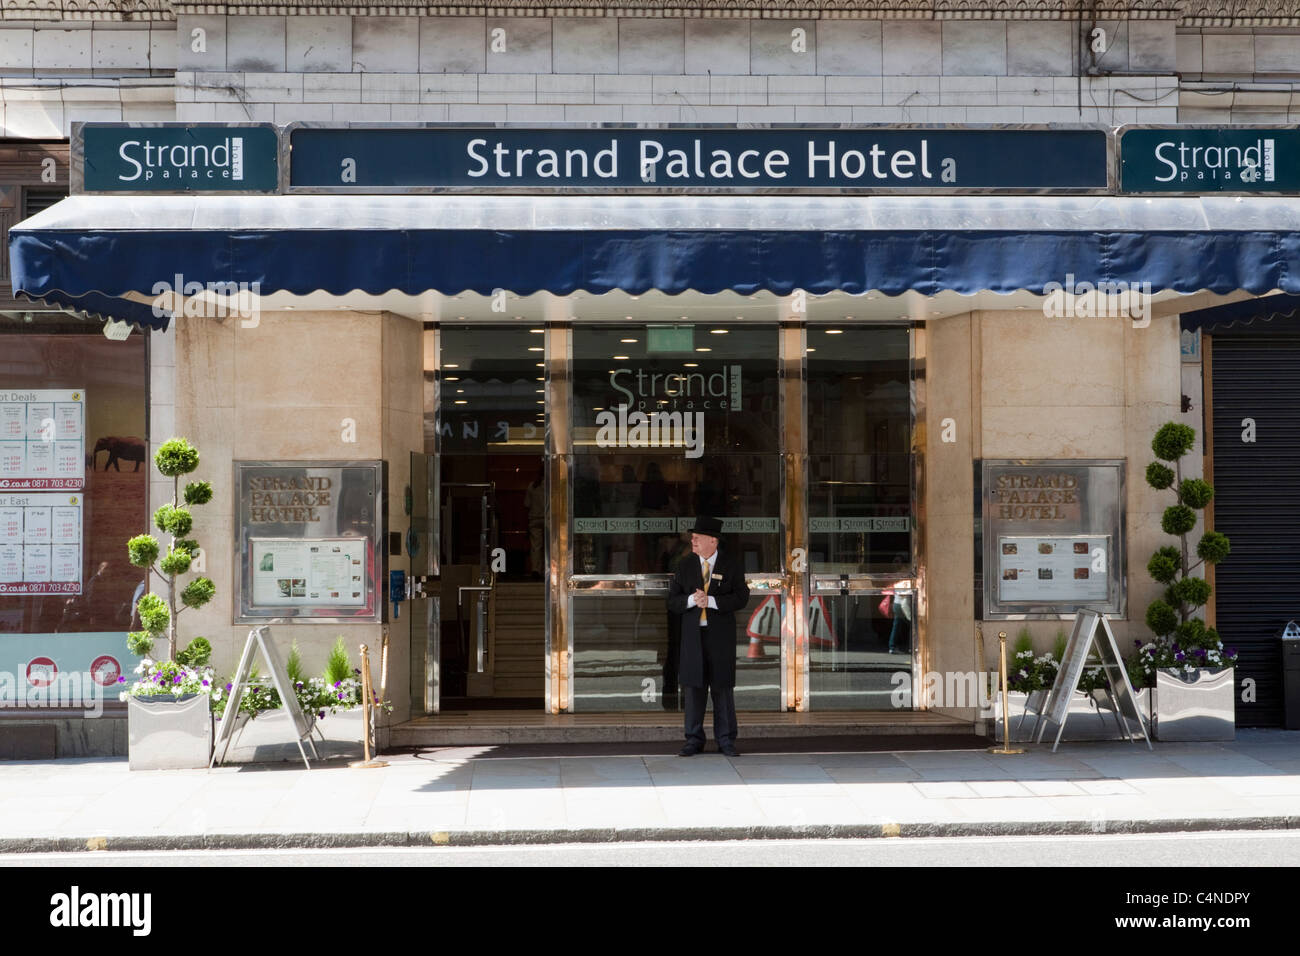 Le Strand Palace Hotel, The Strand, Londres, Angleterre Banque D'Images